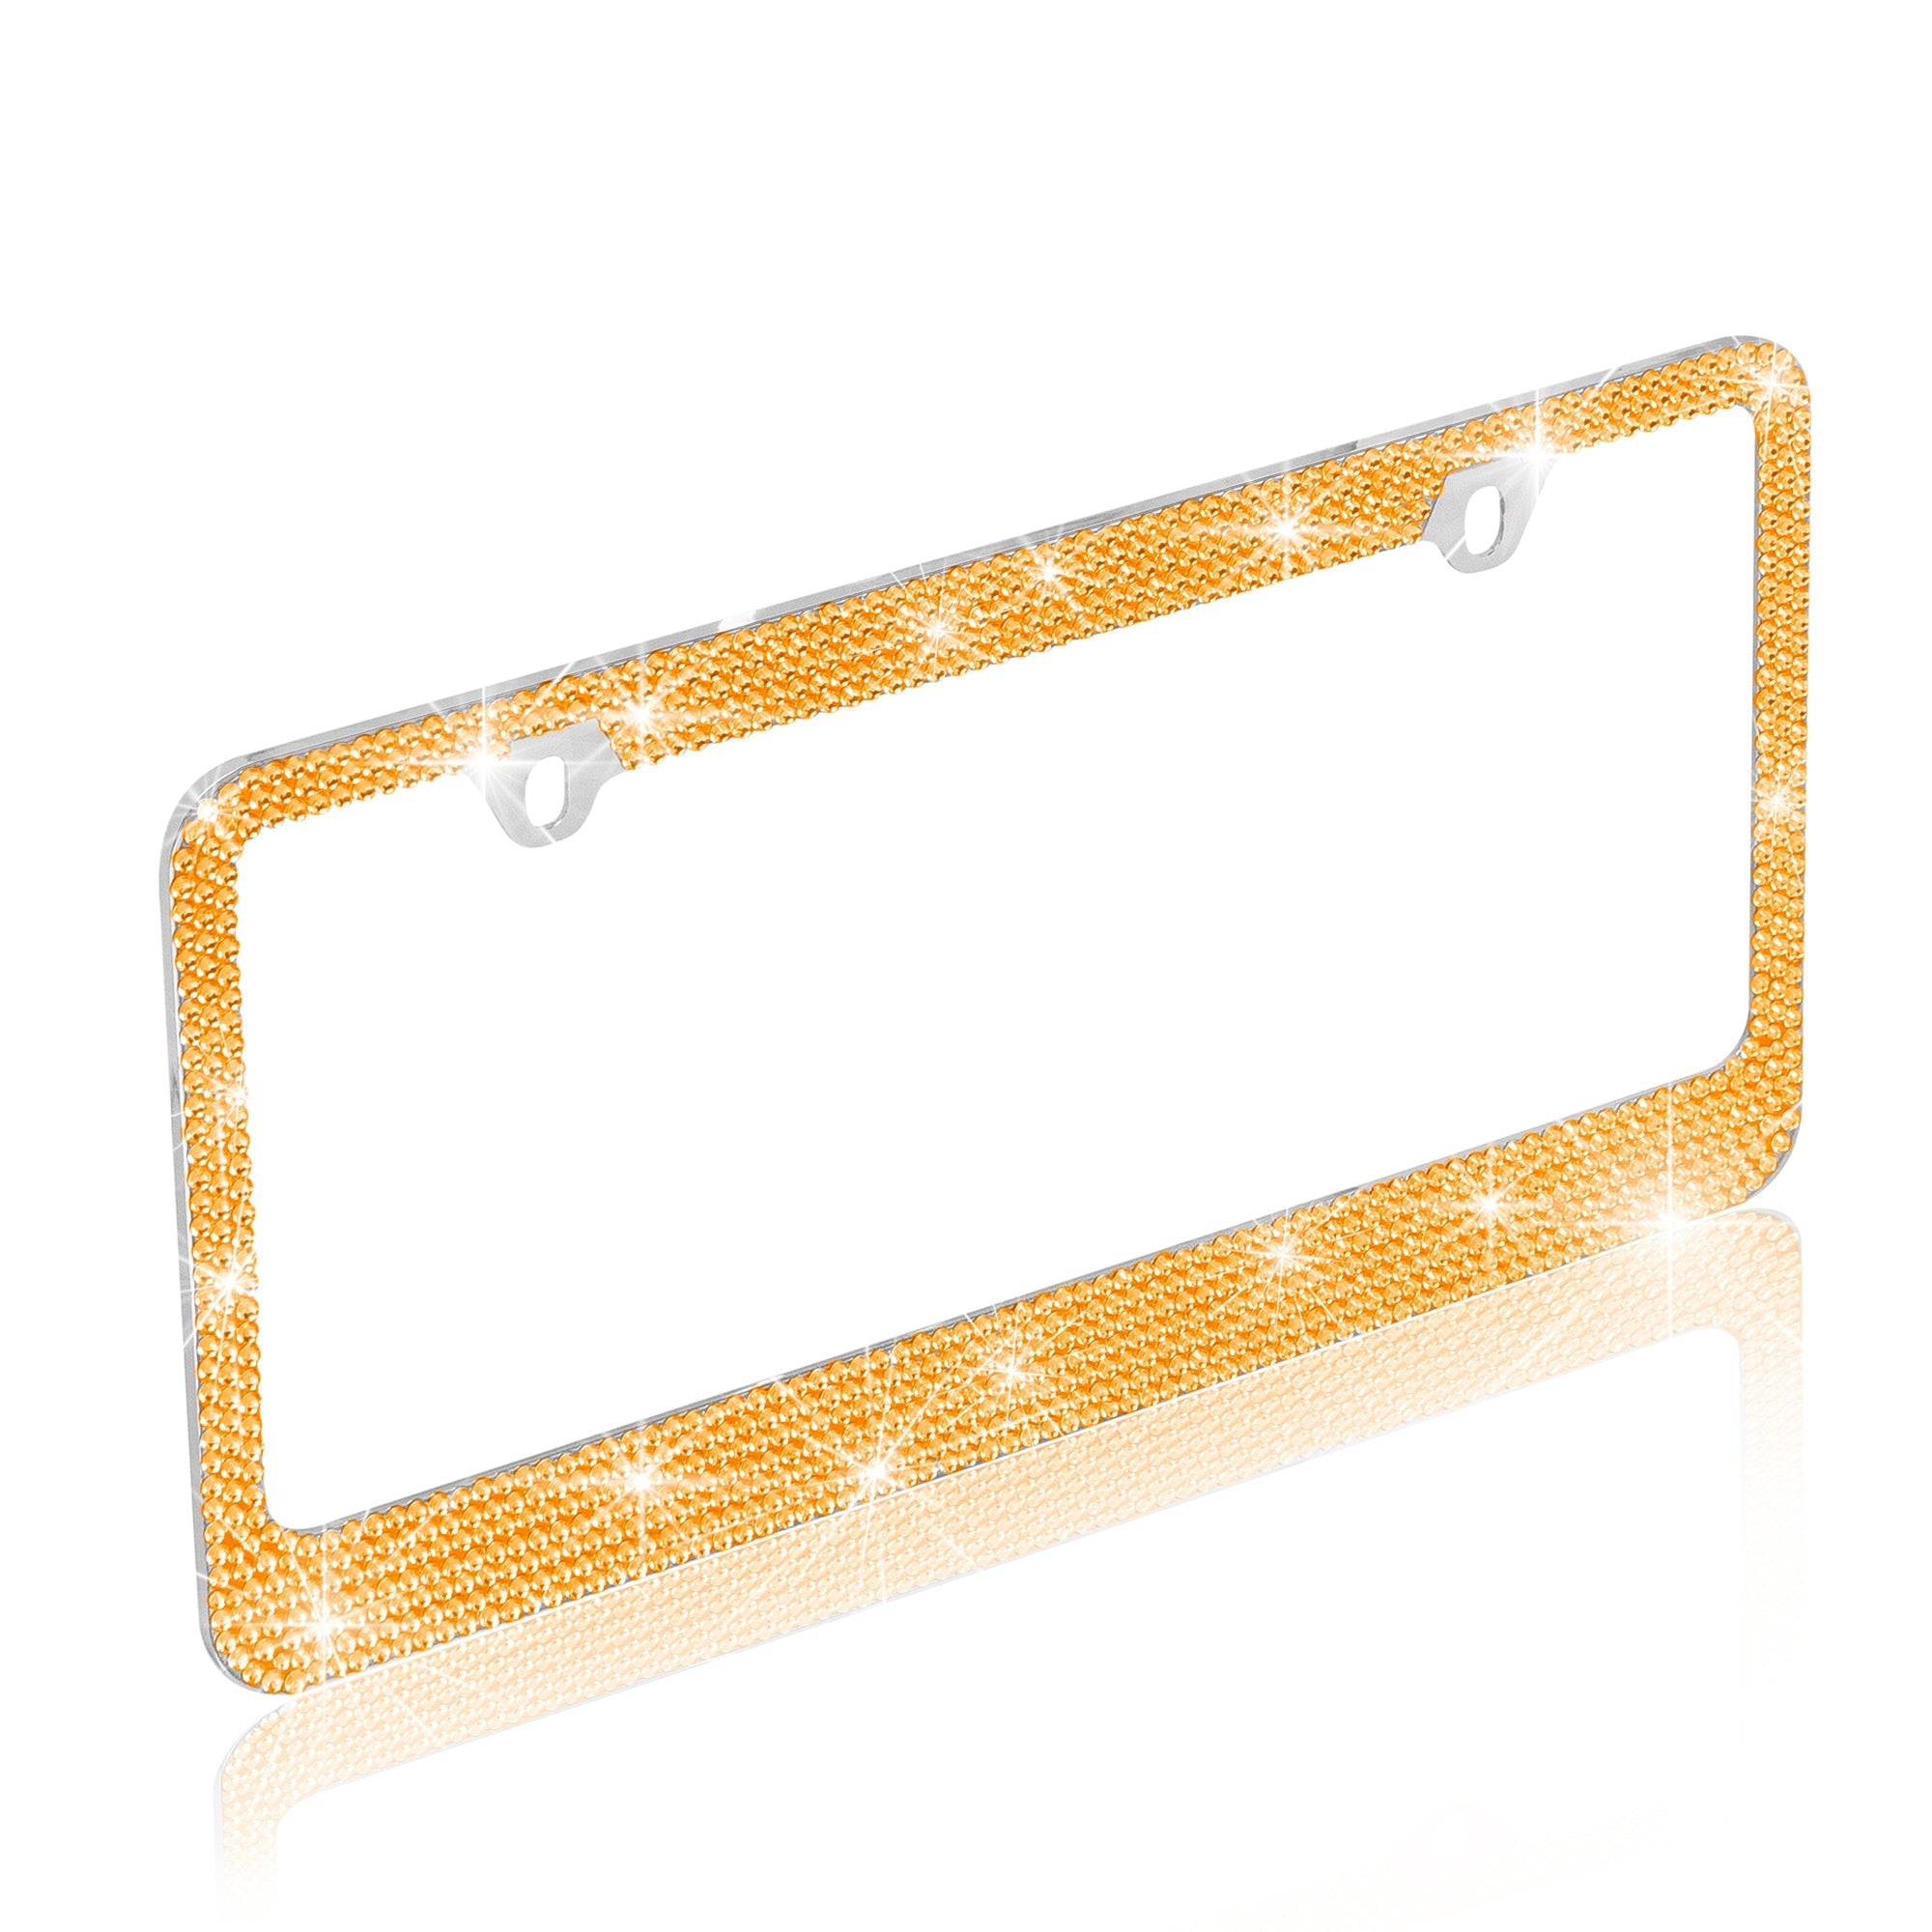 Stainless Steel Yellow Gold Sparkly Sparkling Diamond Crystal Bling Premium License Plate Frame Metal Silver Rhinestone for Women Universal Size for Car Truck SUV (Pack of 2) - 2-Pack